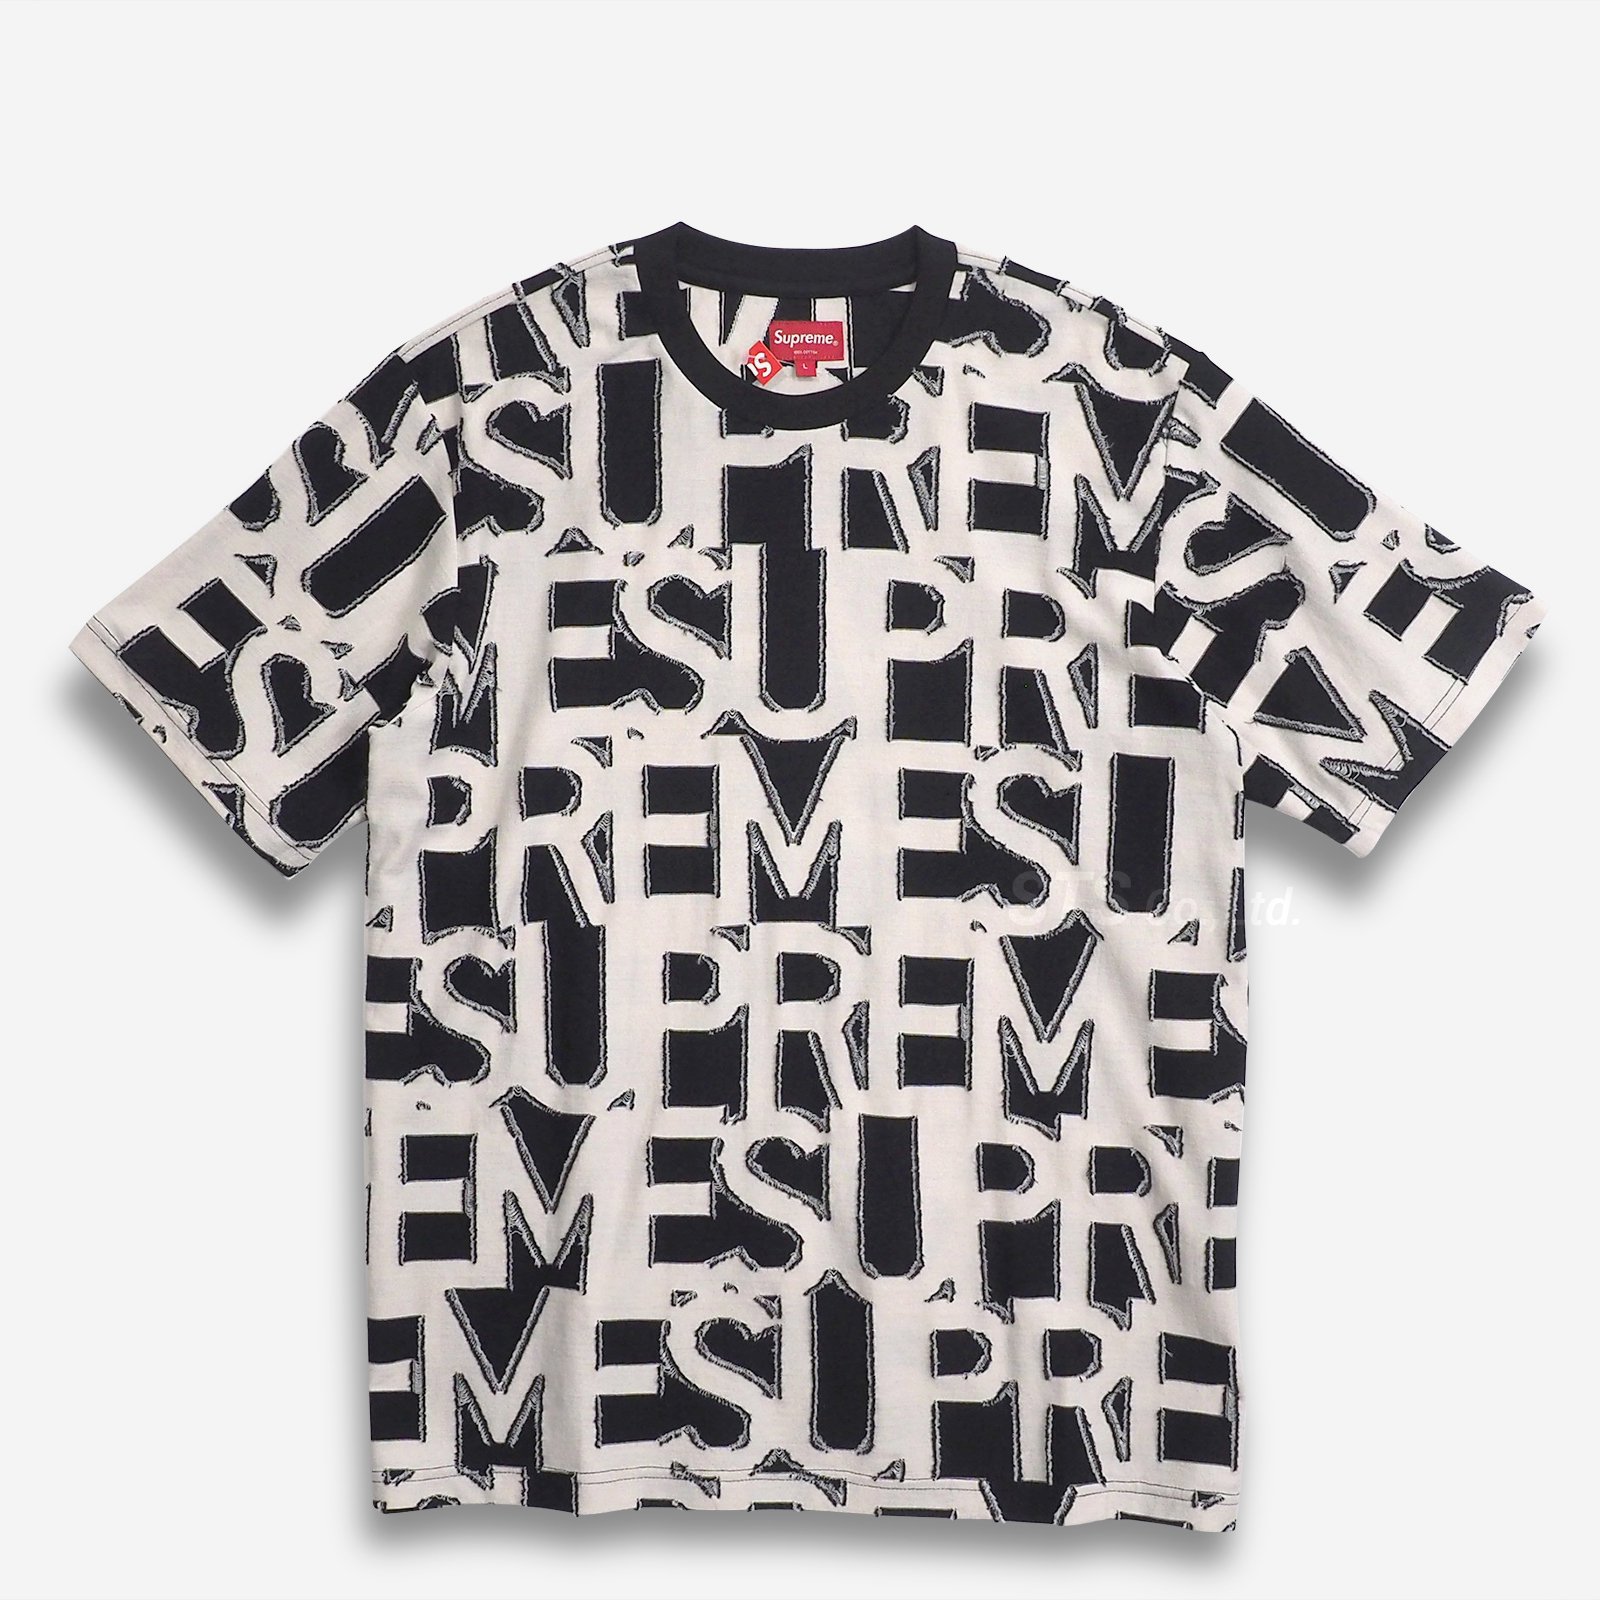 supreme 20ss Spellout S/S Top